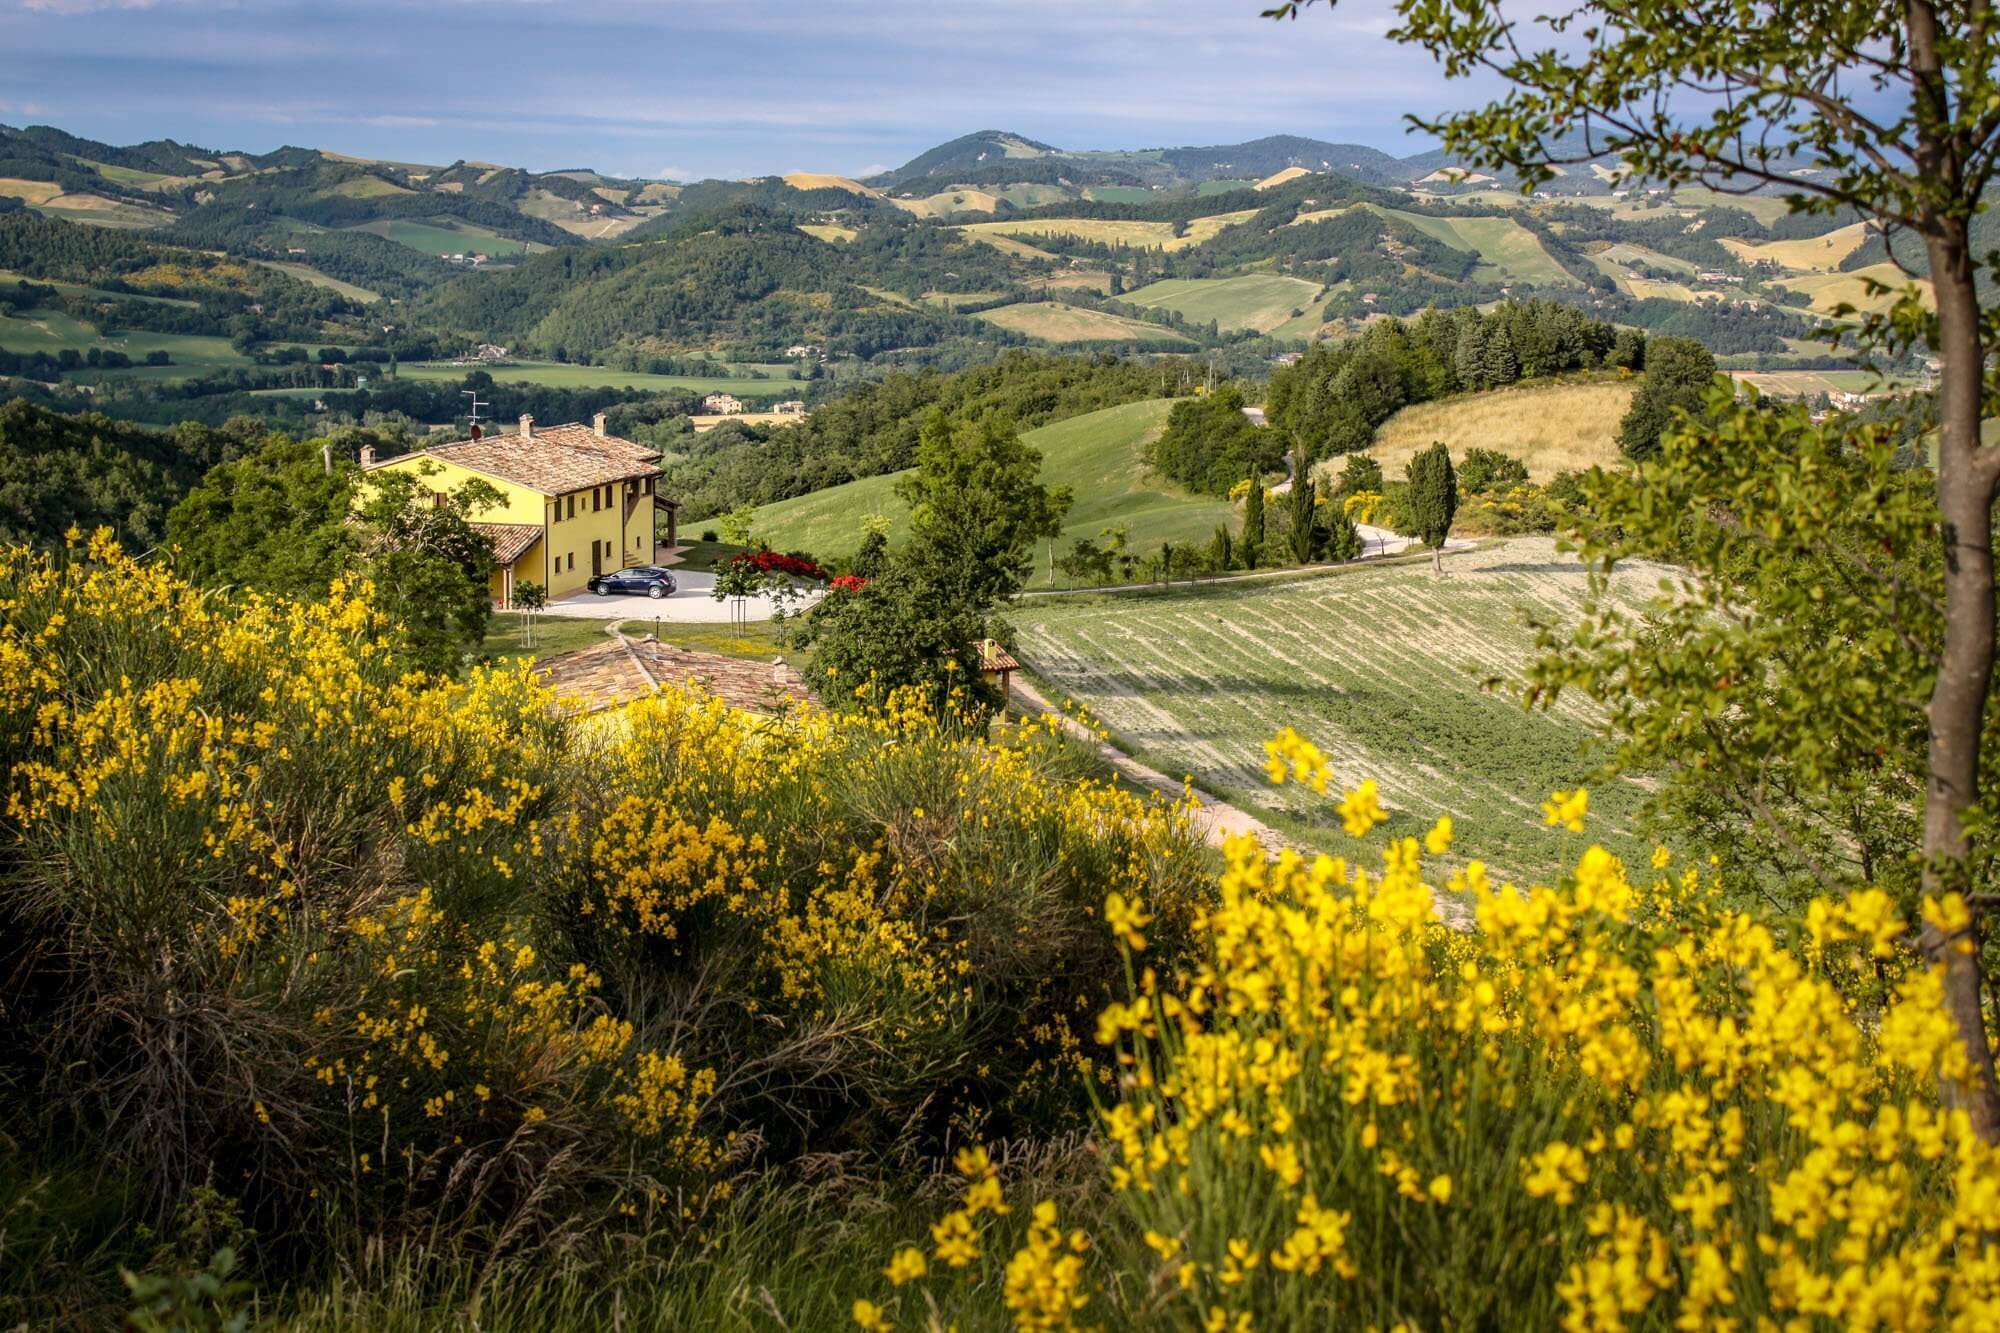 Country House Sant'Angiolino in the rolling hills of Le Marche, Italy